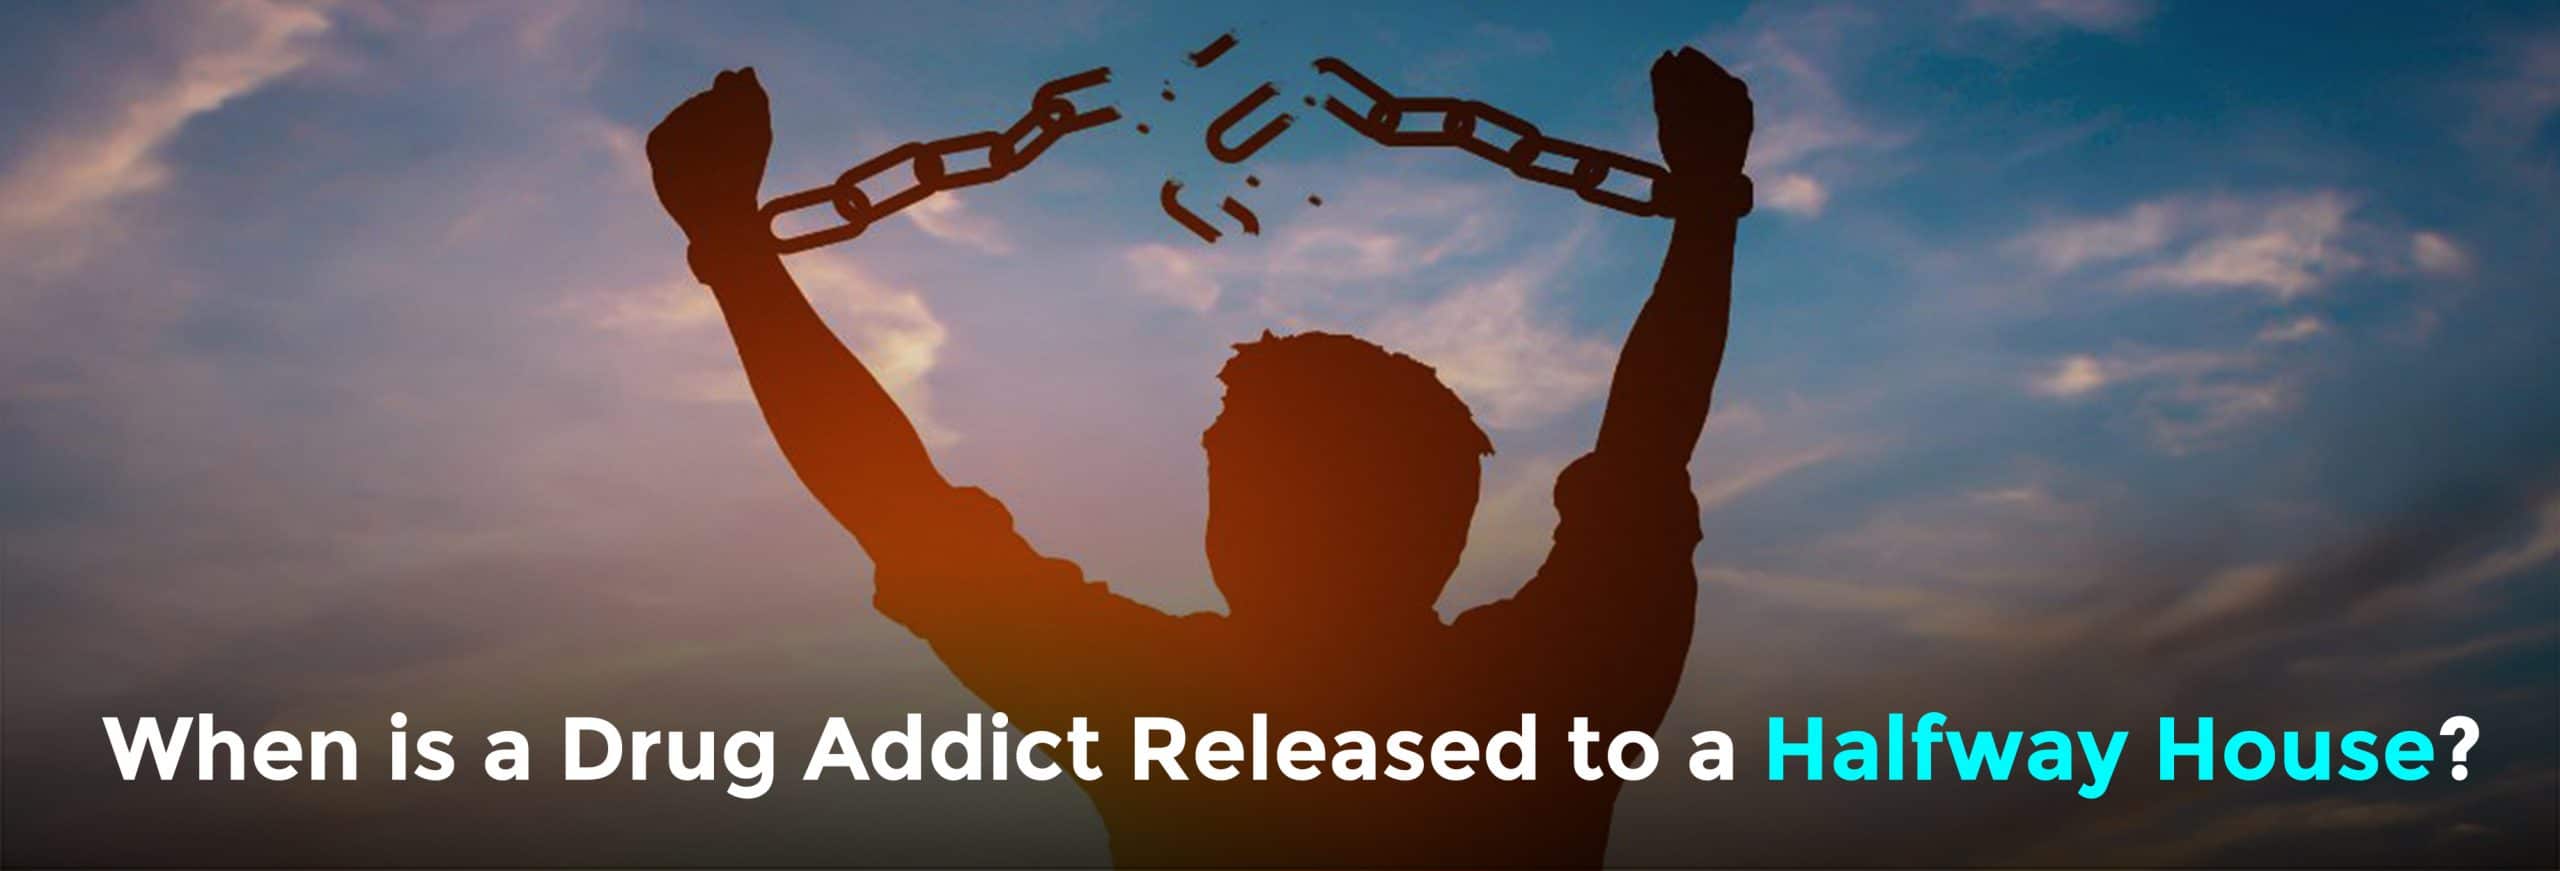 When is a Drug Addict Released to a Halfway House?